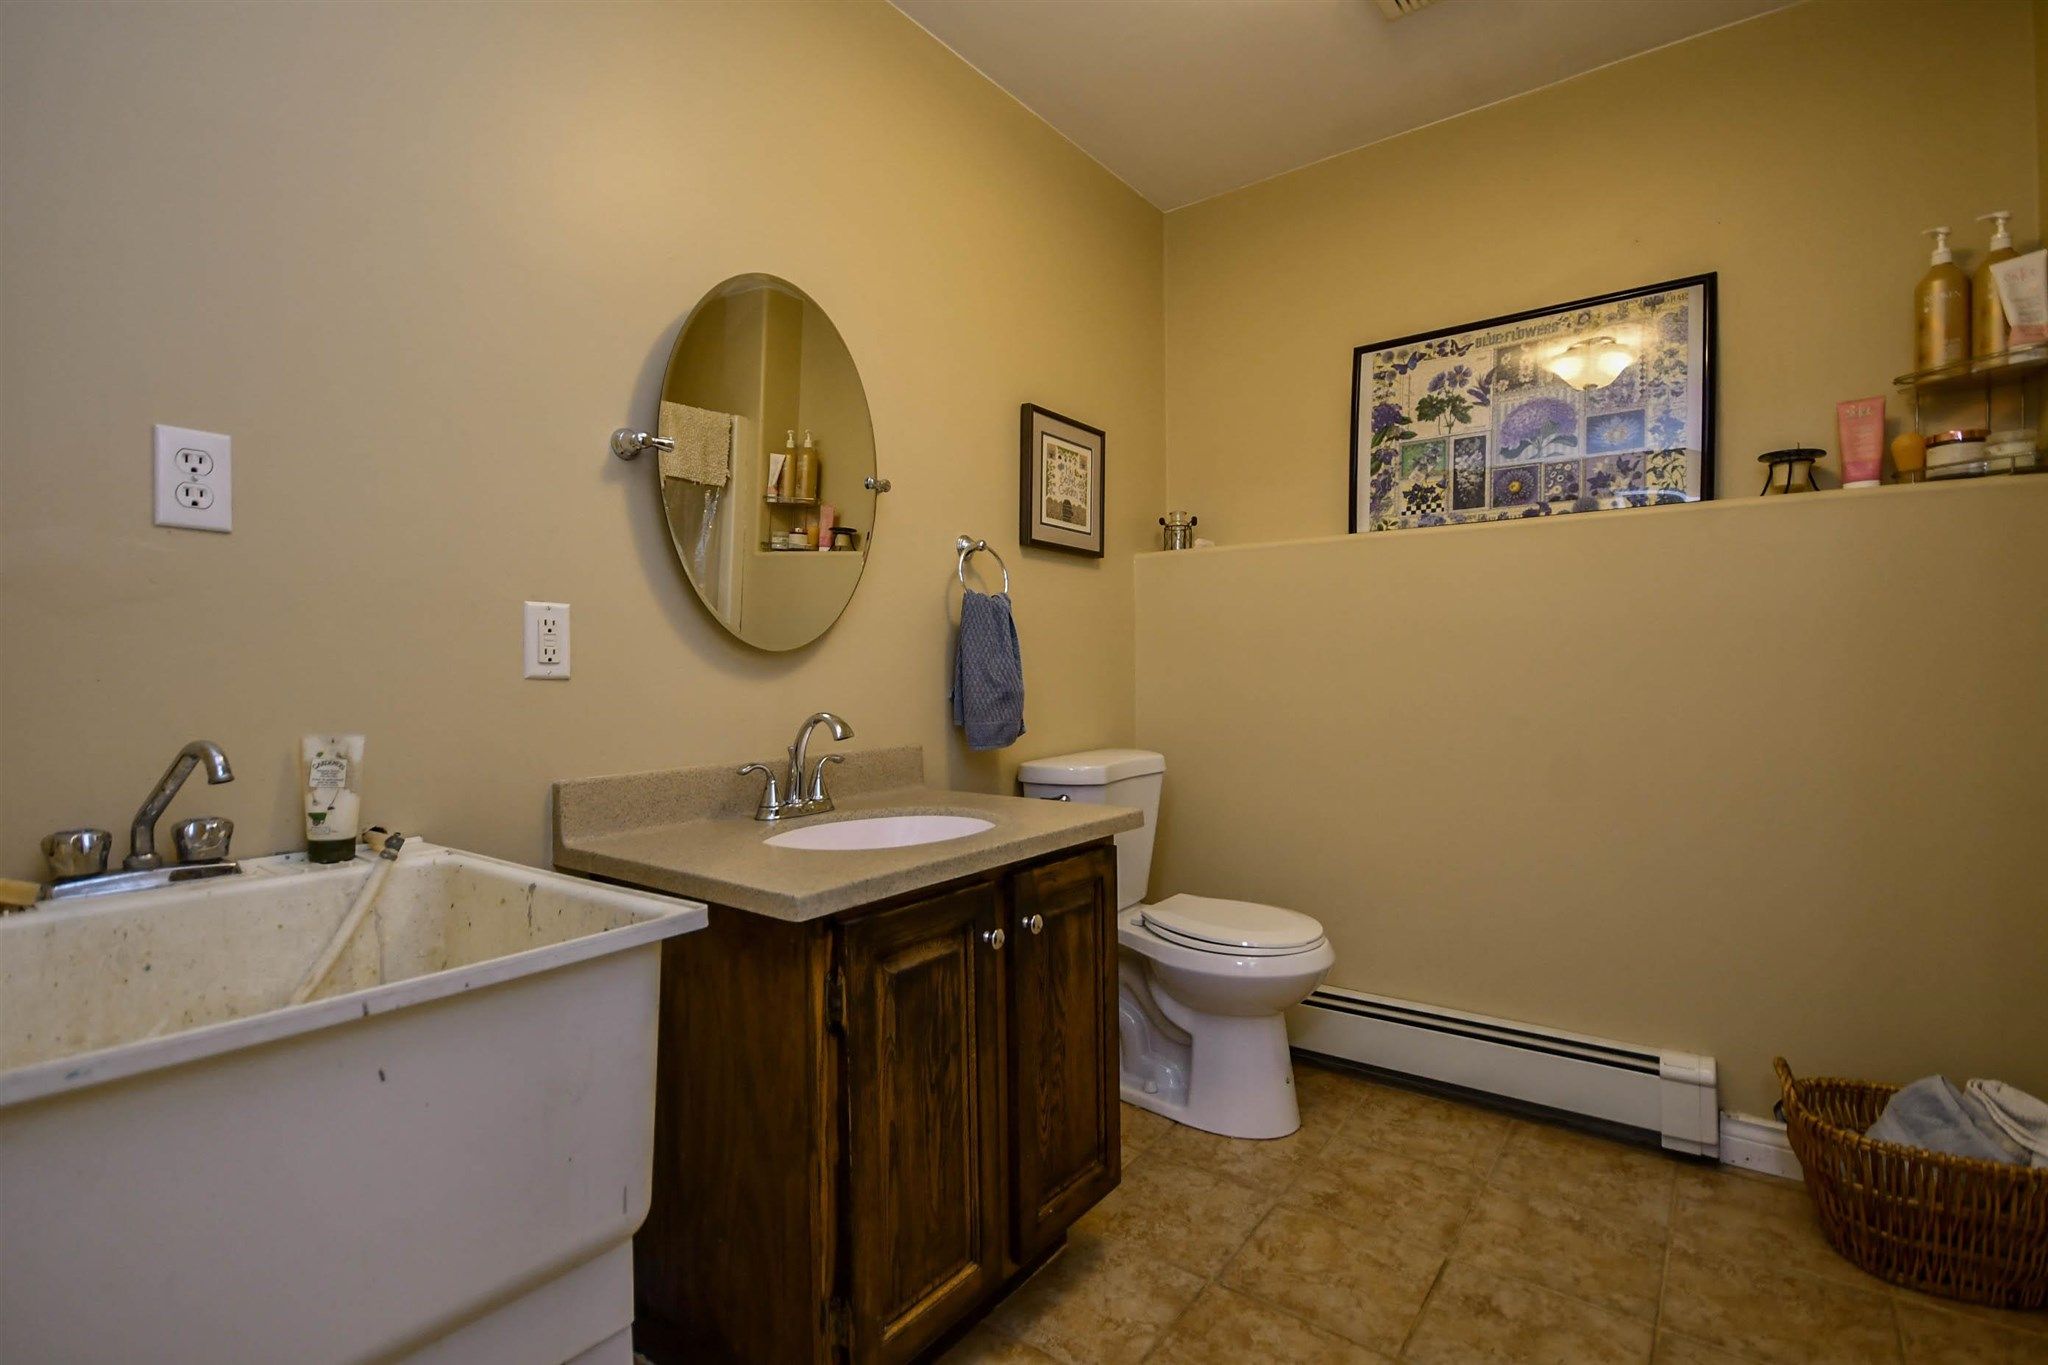 Photo 23: Photos: 290 St George Blvd in Kingswood: 21-Kingswood, Haliburton Hills, Hammonds Pl. Residential for sale (Halifax-Dartmouth)  : MLS®# 202113325